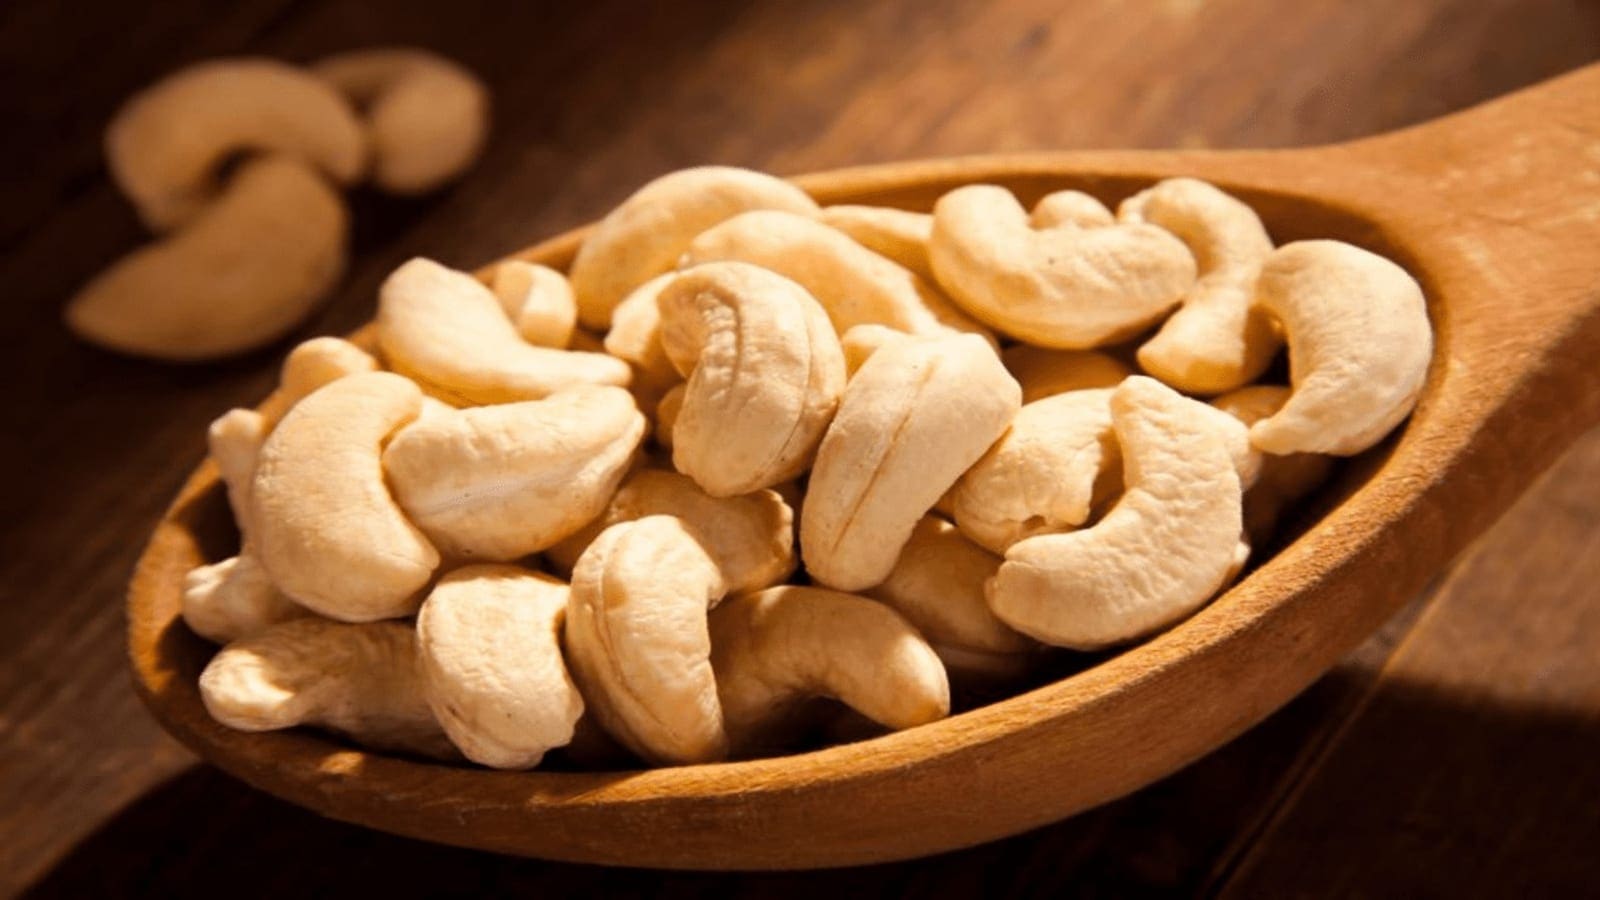 Global nuts supplier RRF, USAID to boost West Africa’s cashew nut value chain with US$3m investment